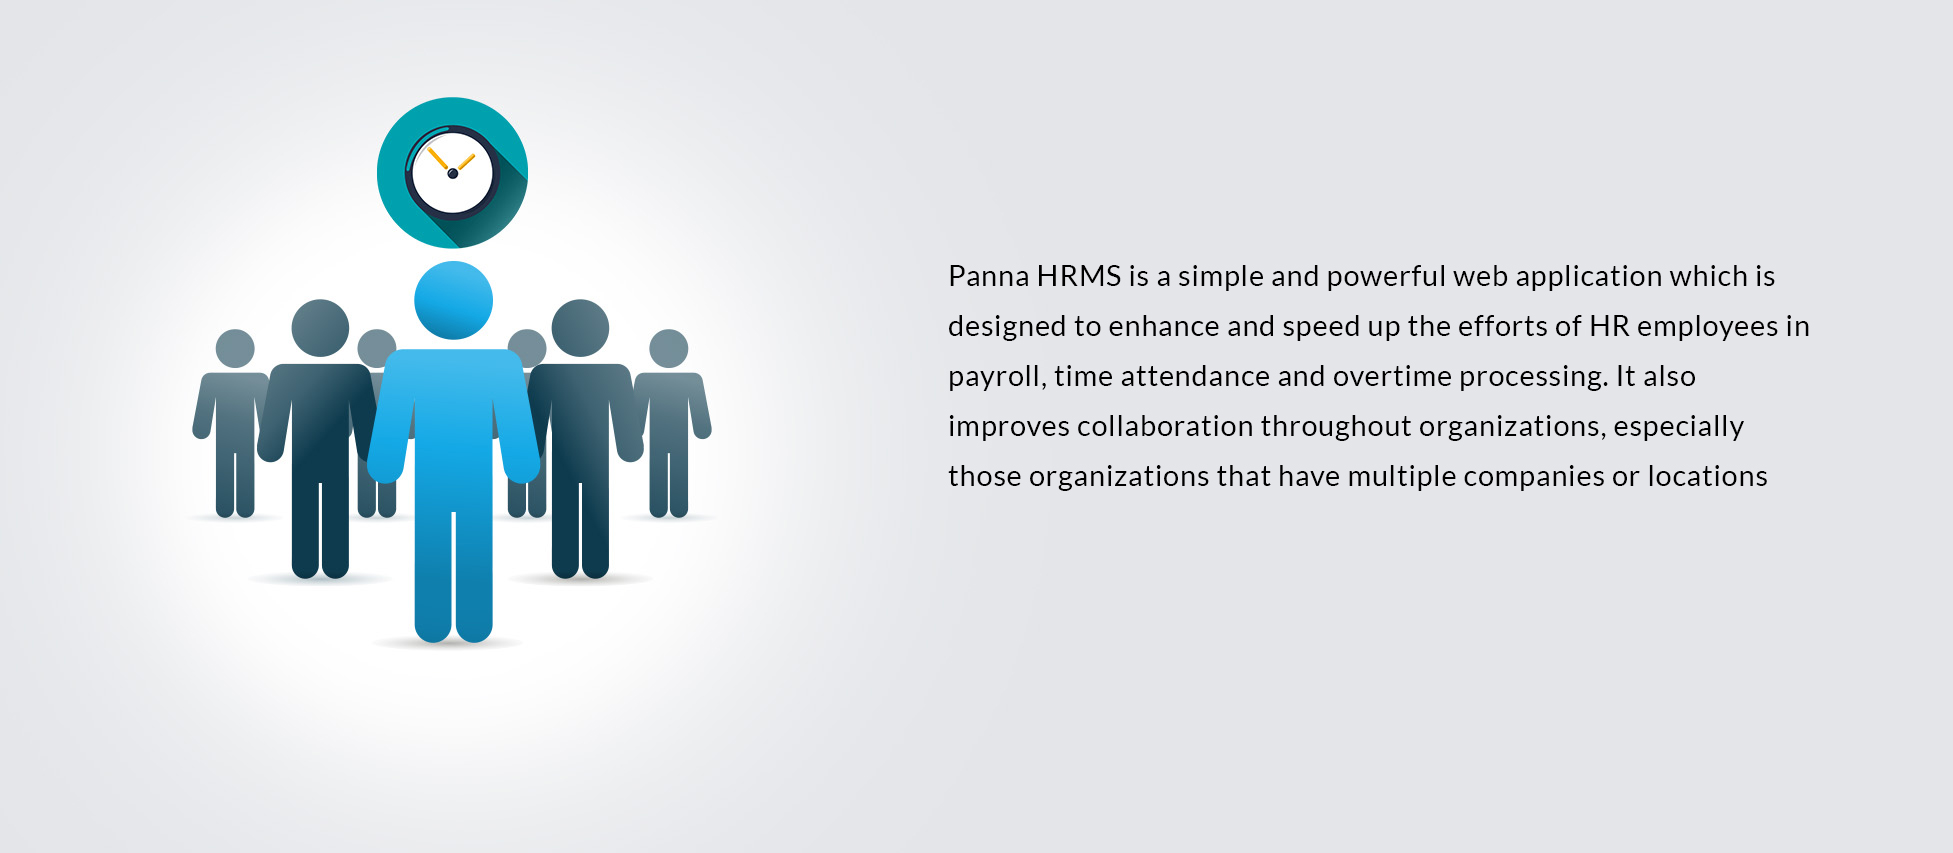 Panna HRMS is a simple and powerful web application which is designed to enhance and speed up the efforts of HR employees in payroll, time attendance and overtime processing. It also improves collaboration throughout organizations, especially those organizations that have multiple companies or locations